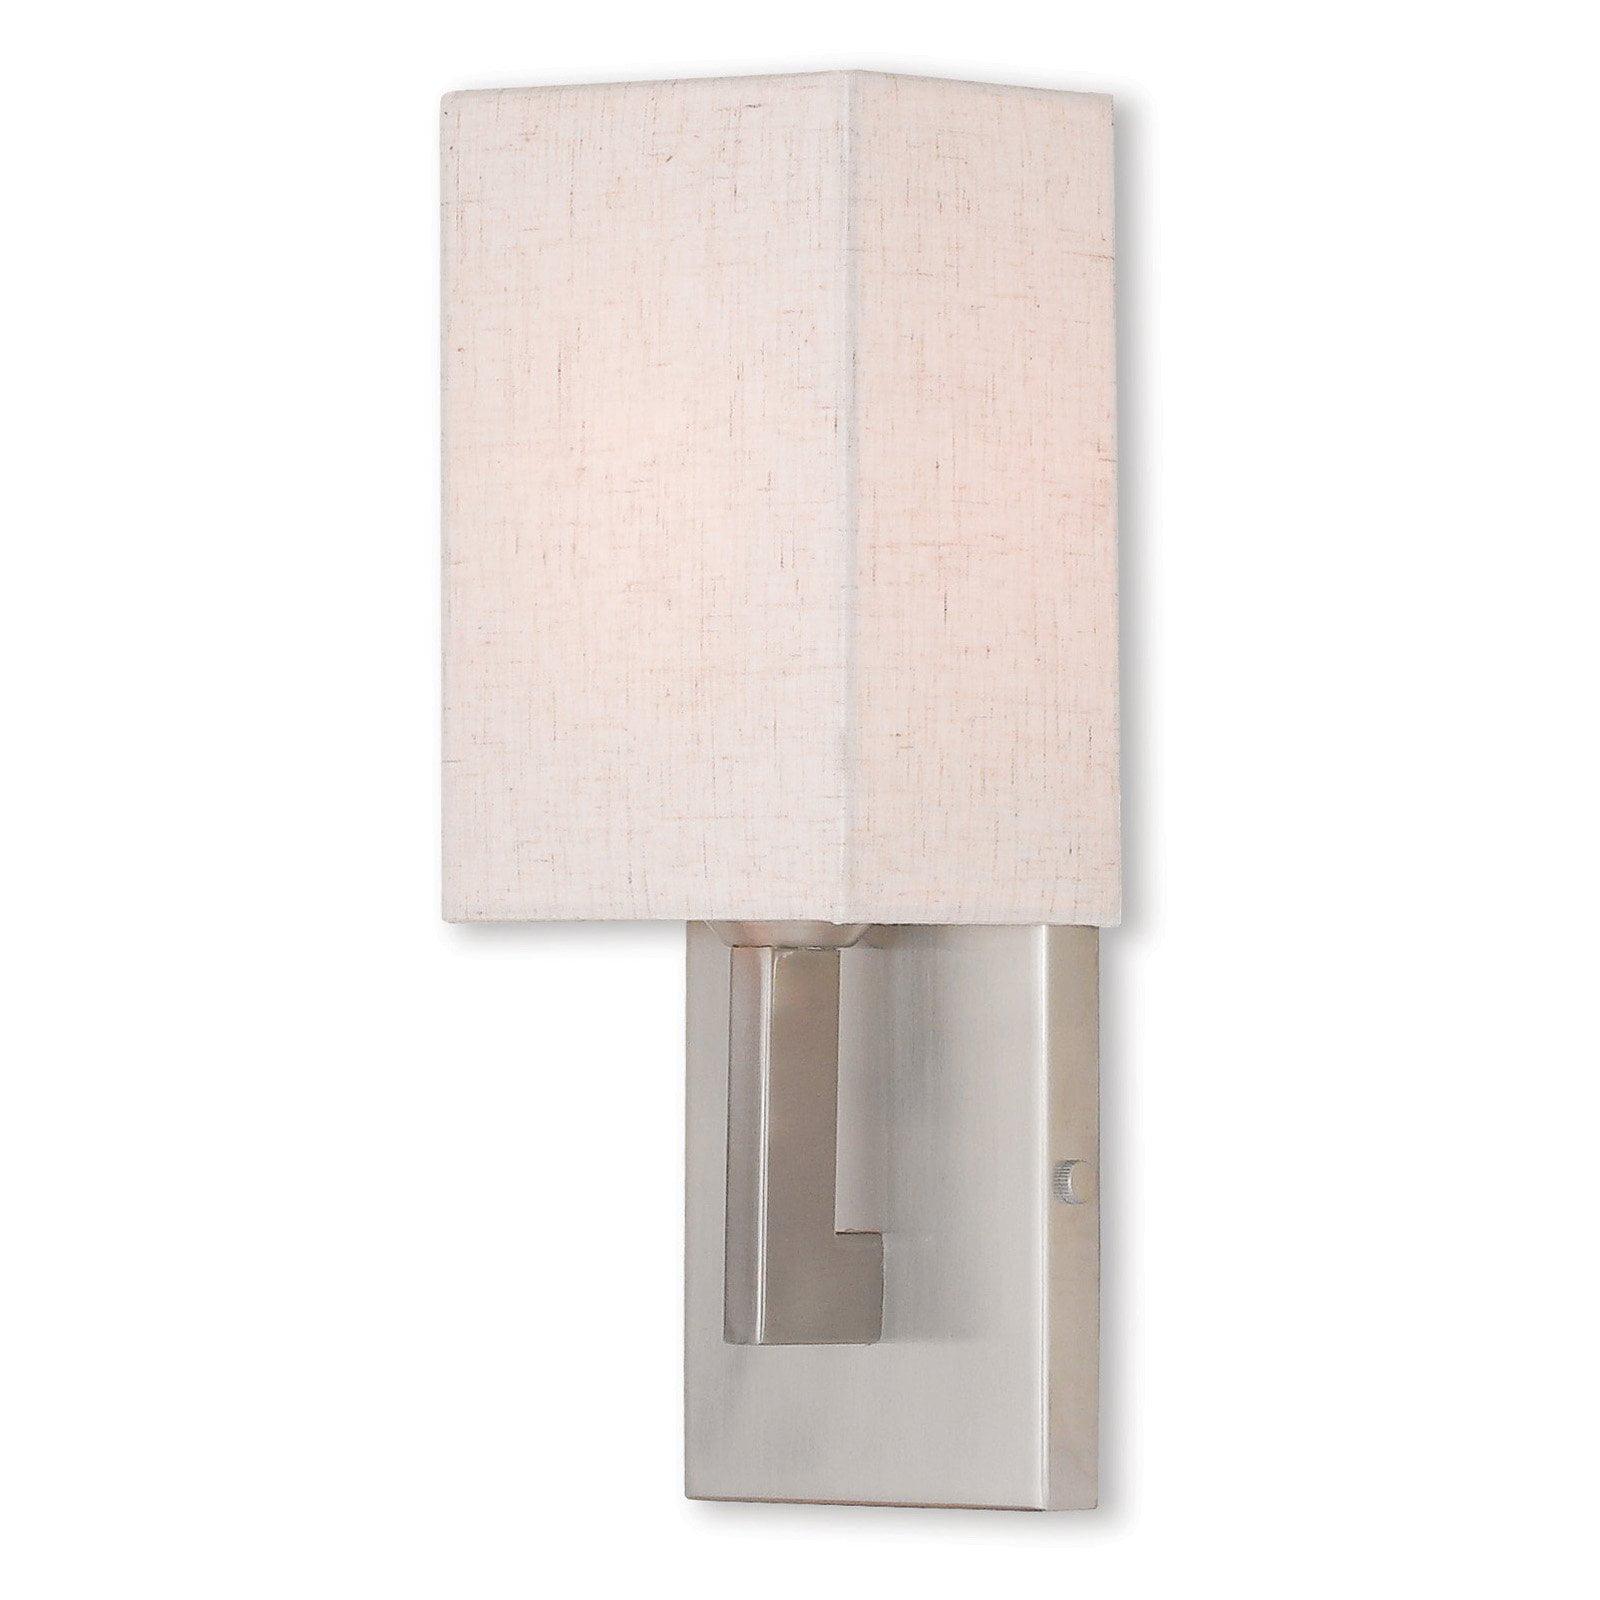 Meridian Brushed Nickel Dimmable 1-Light Wall Sconce with Oatmeal Shade